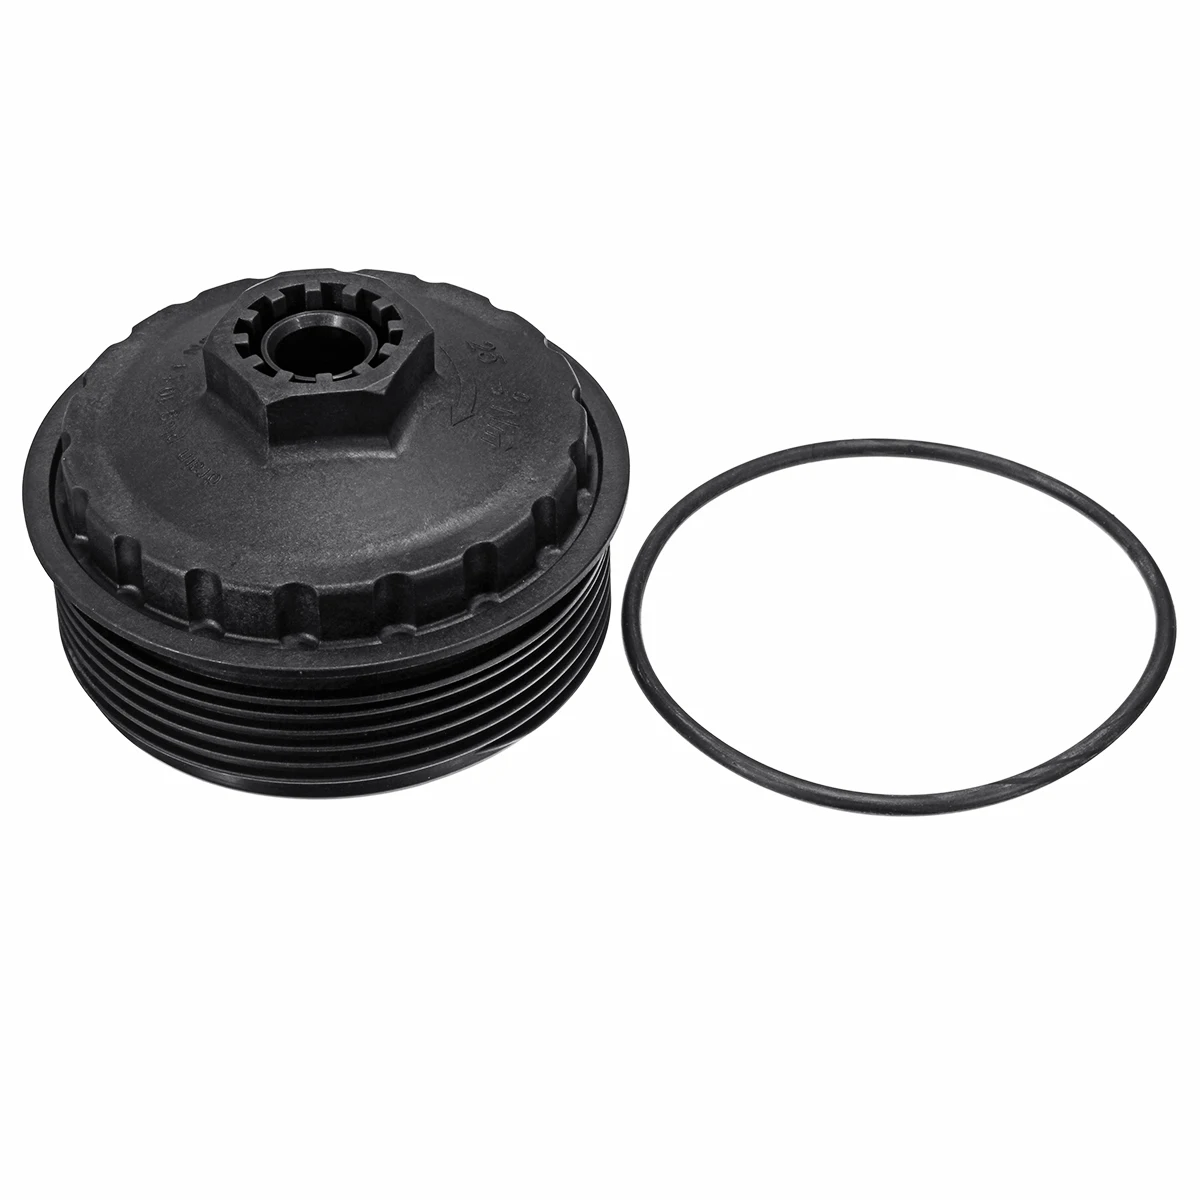 Oil Filter Cap Bowl Cover With Seal For Mondeo Mk3 2.0 2.2 Tdci Diesel